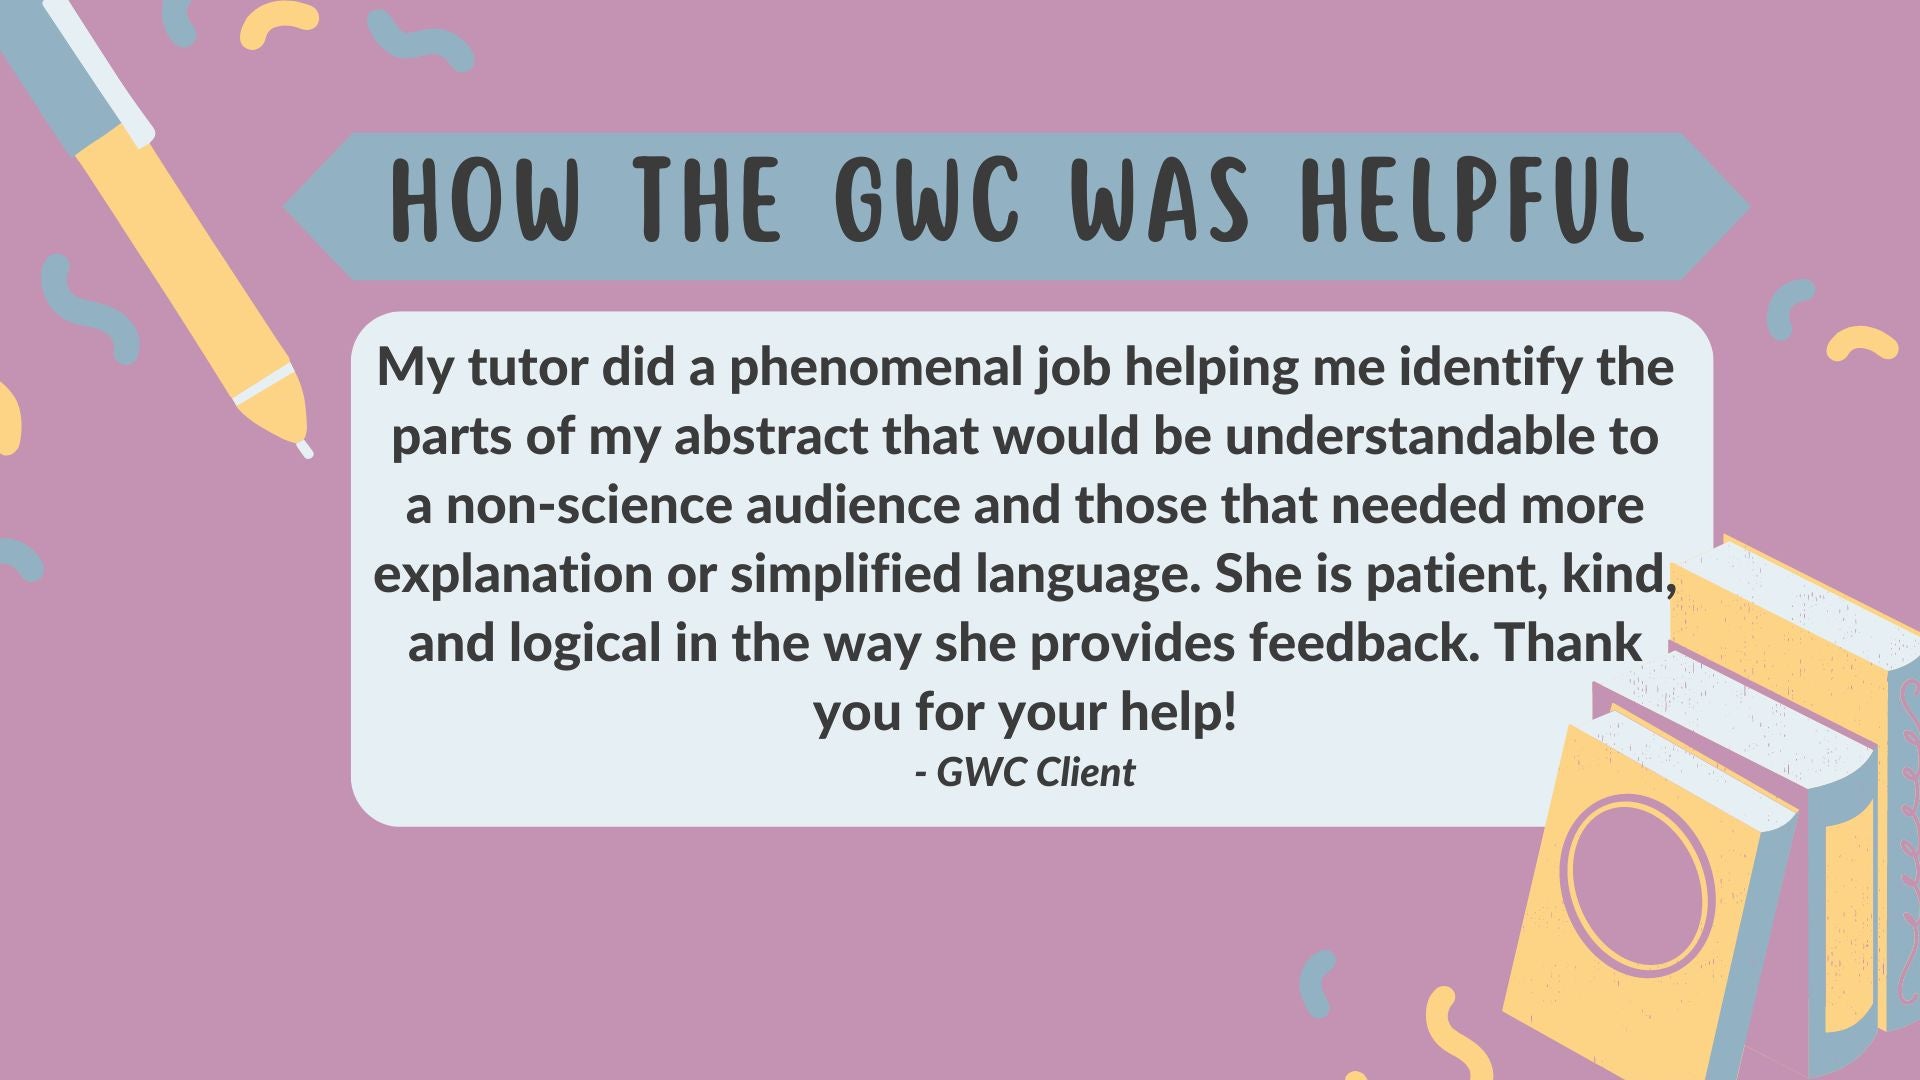 An image of GWC client feedback answering "how the GWC was helpful": My tutor did a phenomenal job helping me identify the parts of my abstract that would be understandable to a non-science audience and those that needed more explanation or simplified language. She is patient, kind, and logical in the way she provides feedback. Thank you for your help!